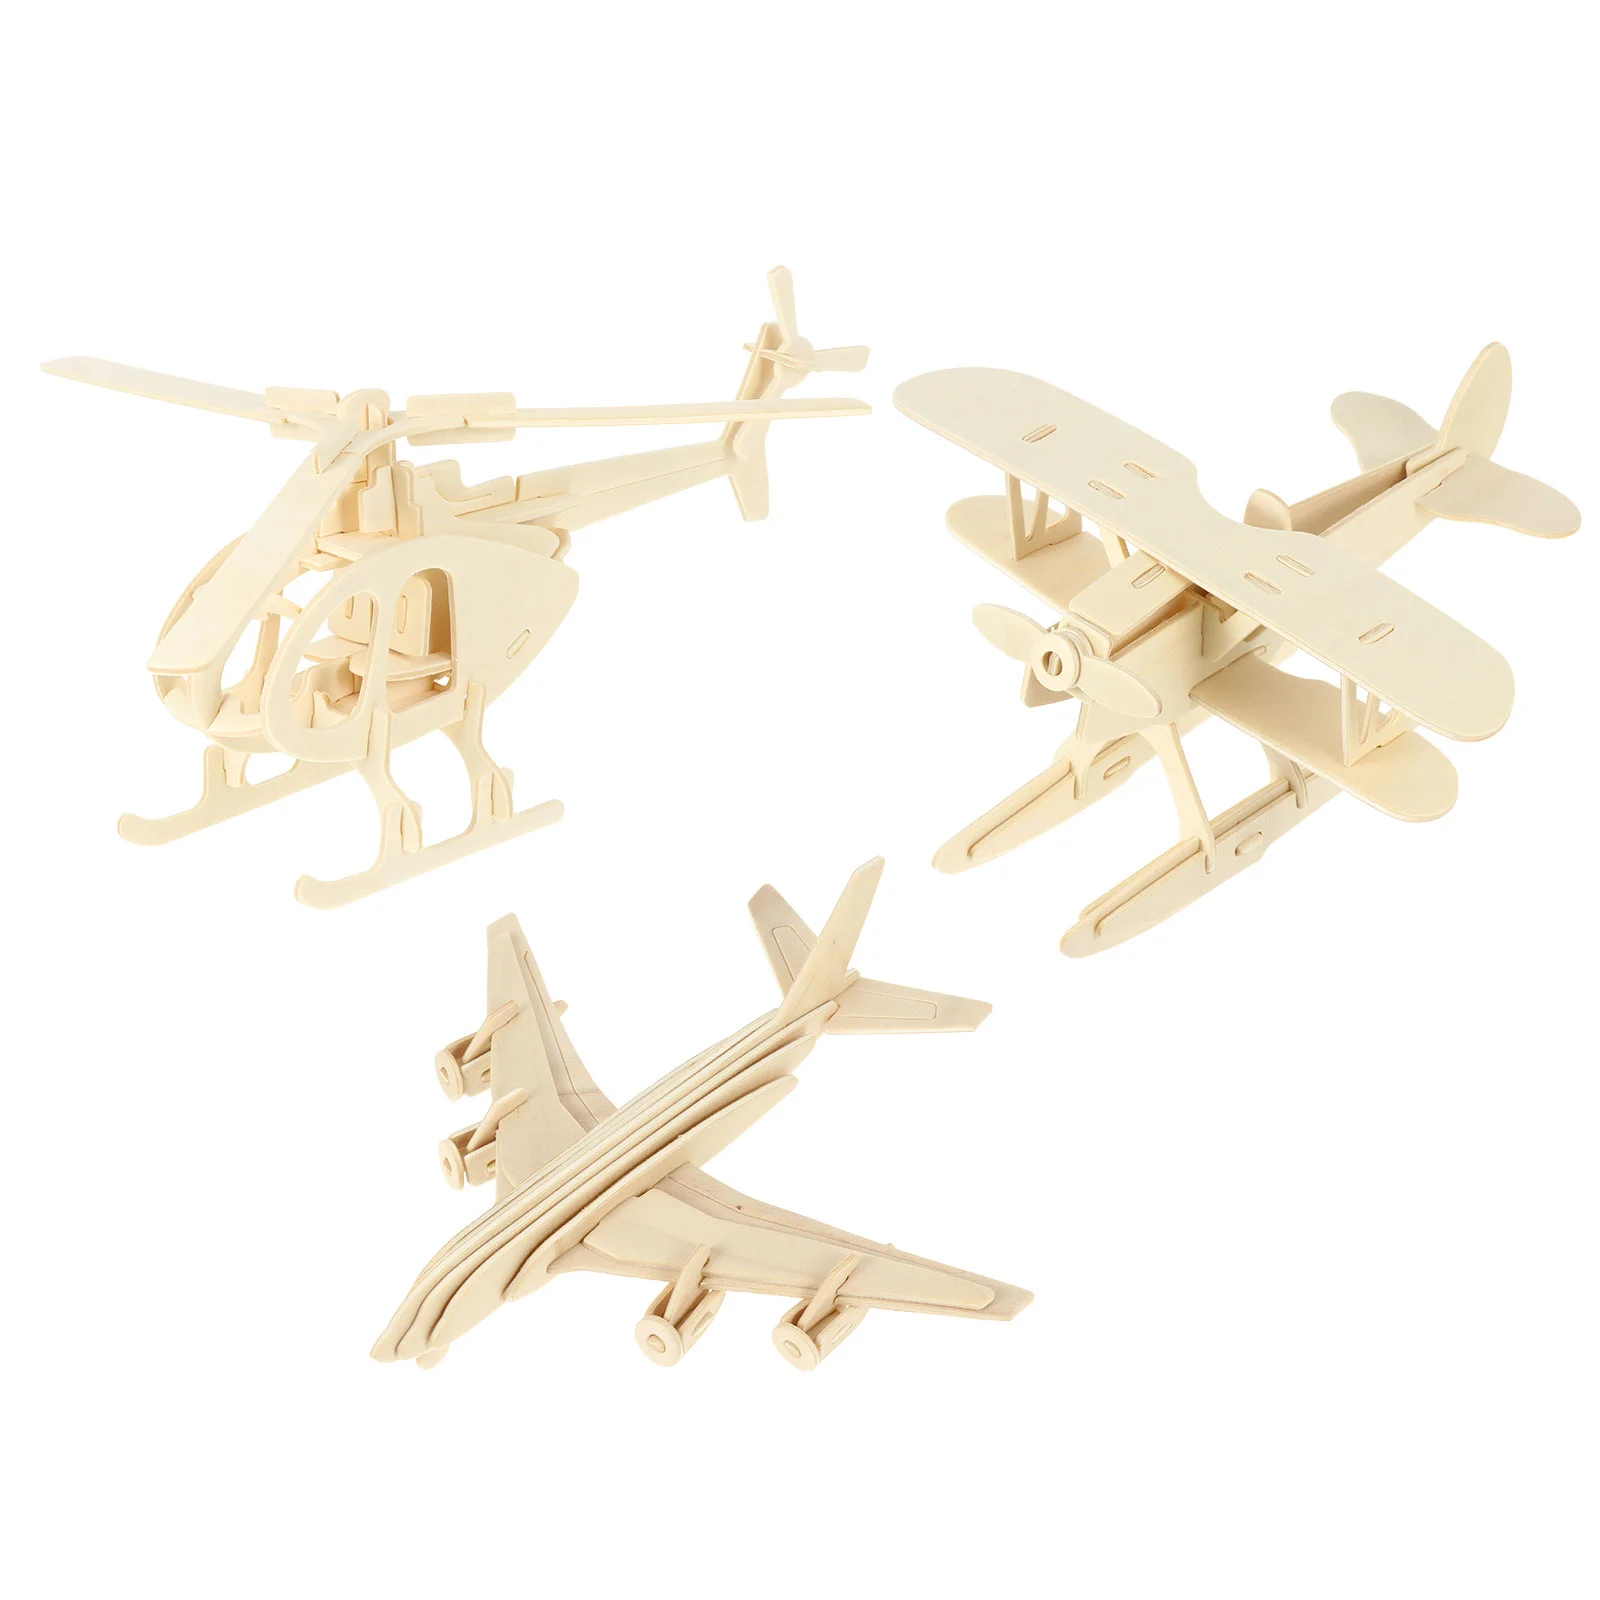 

Airplane Model Aircraft Kit Wood Wooden Jigsaw Puzzles Blocks Toys Child Educational